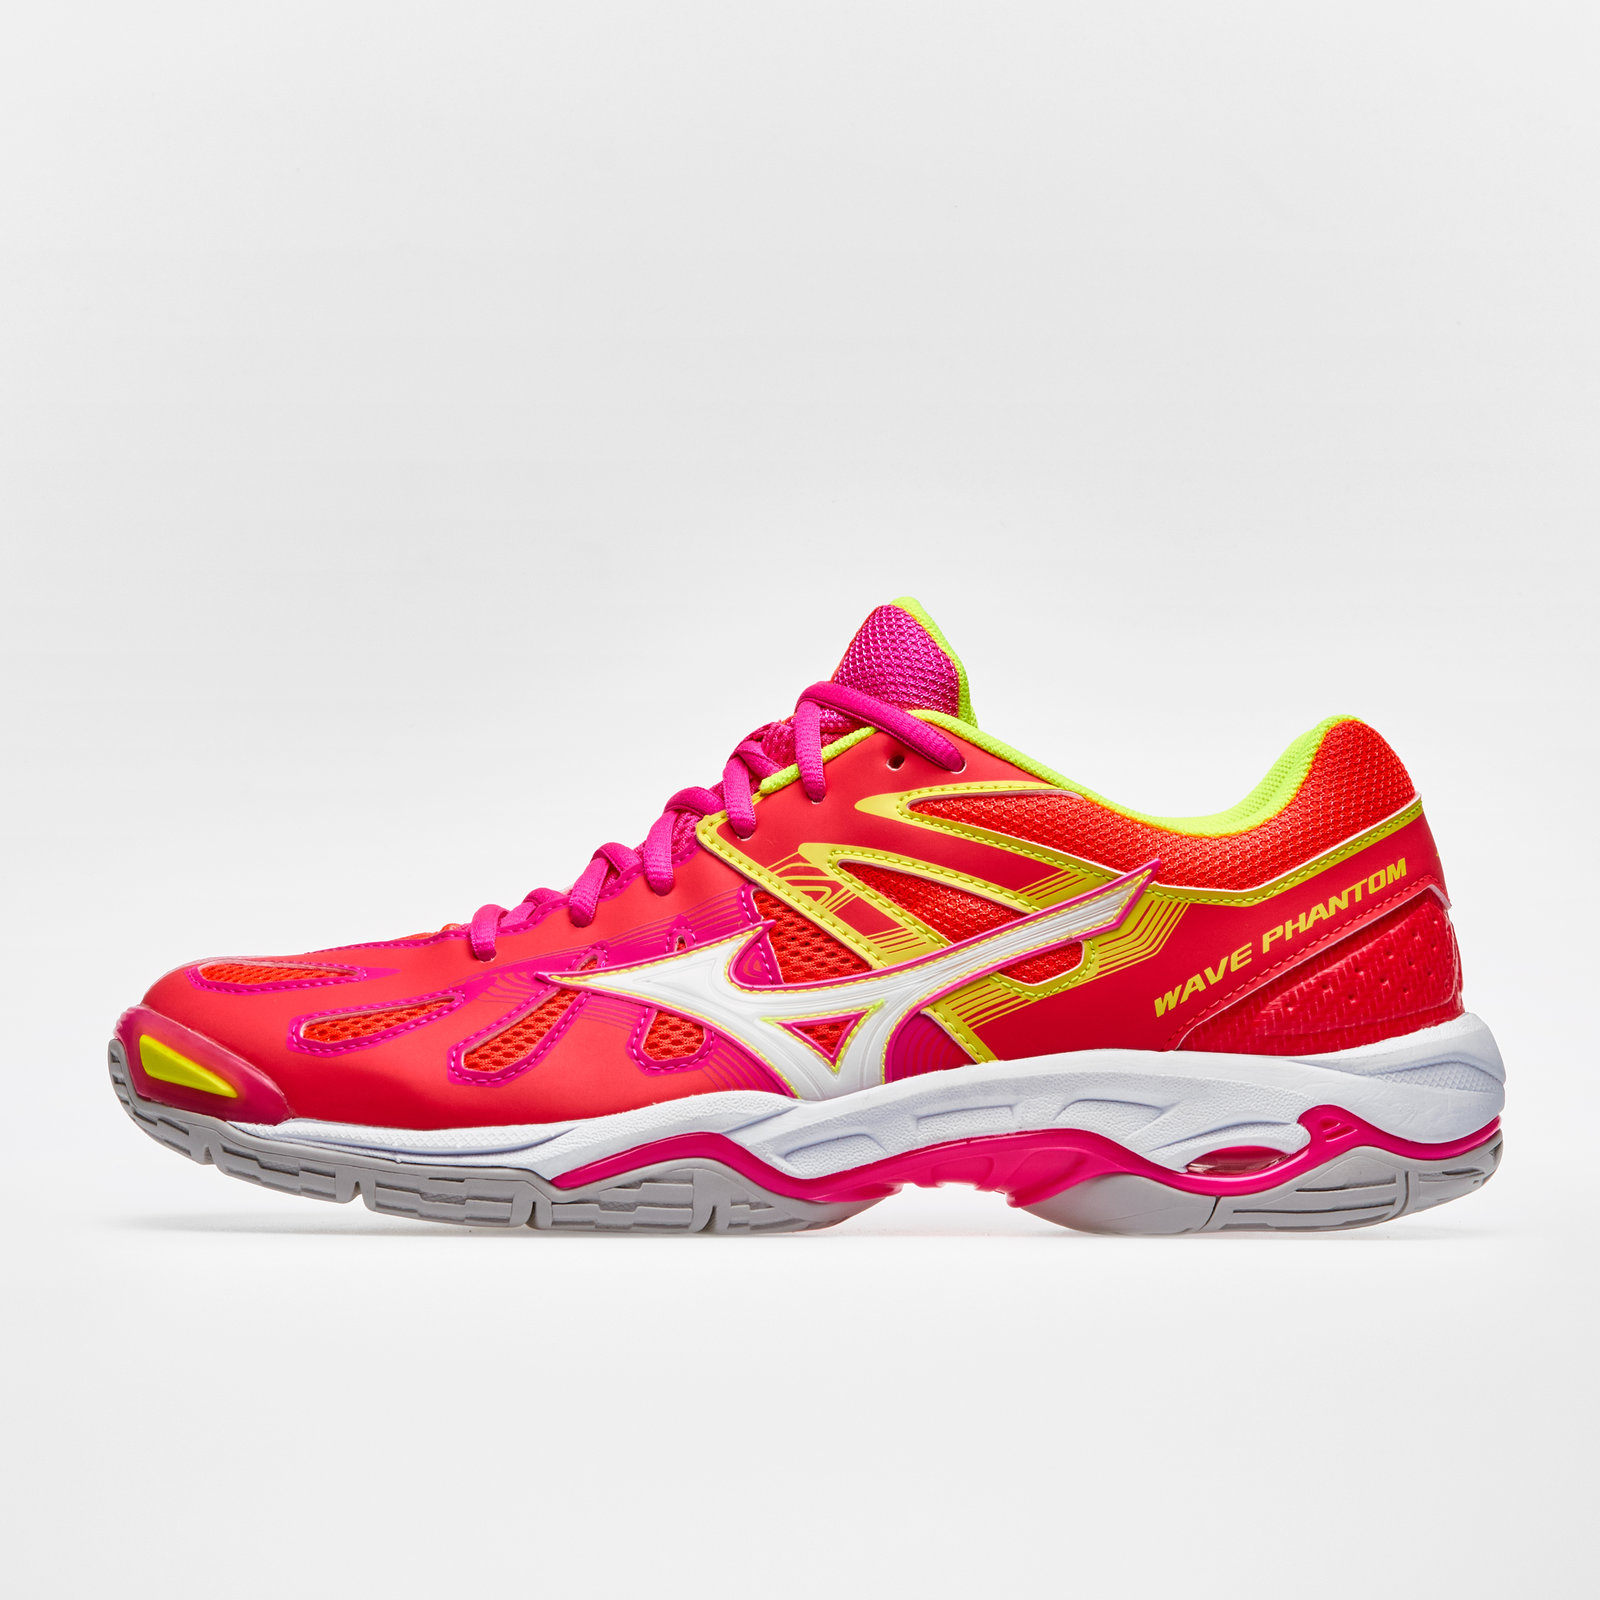 womens netball trainers Sale,up to 70 